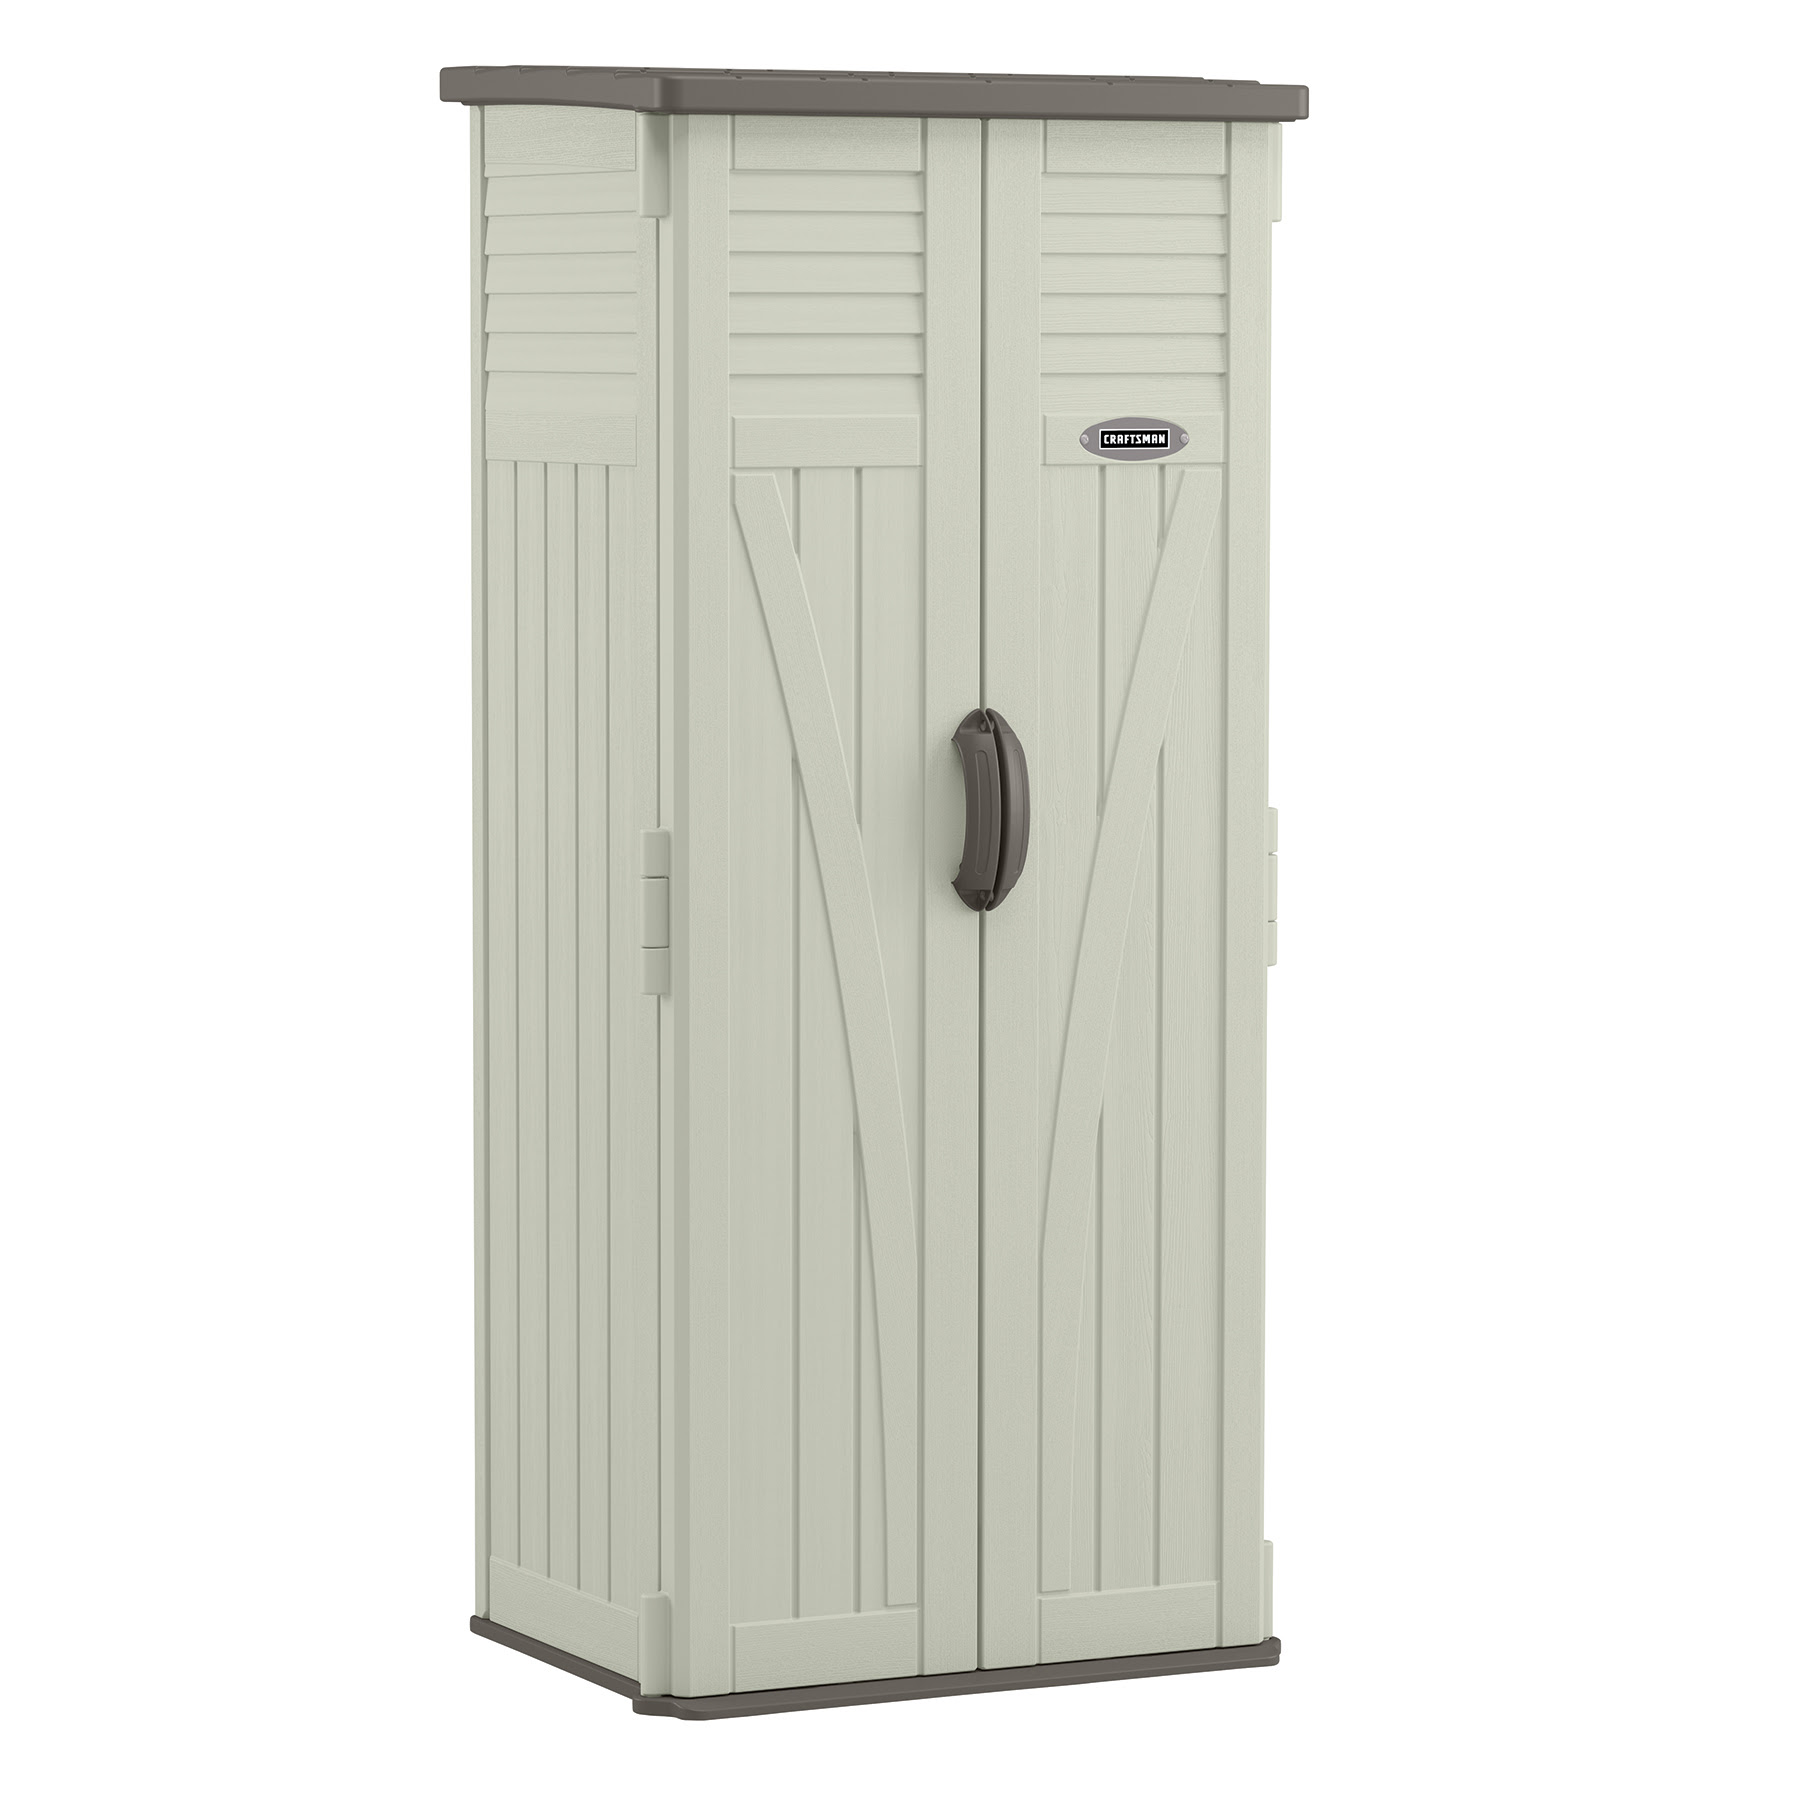 awesome home depot display sheds for sale covid decor